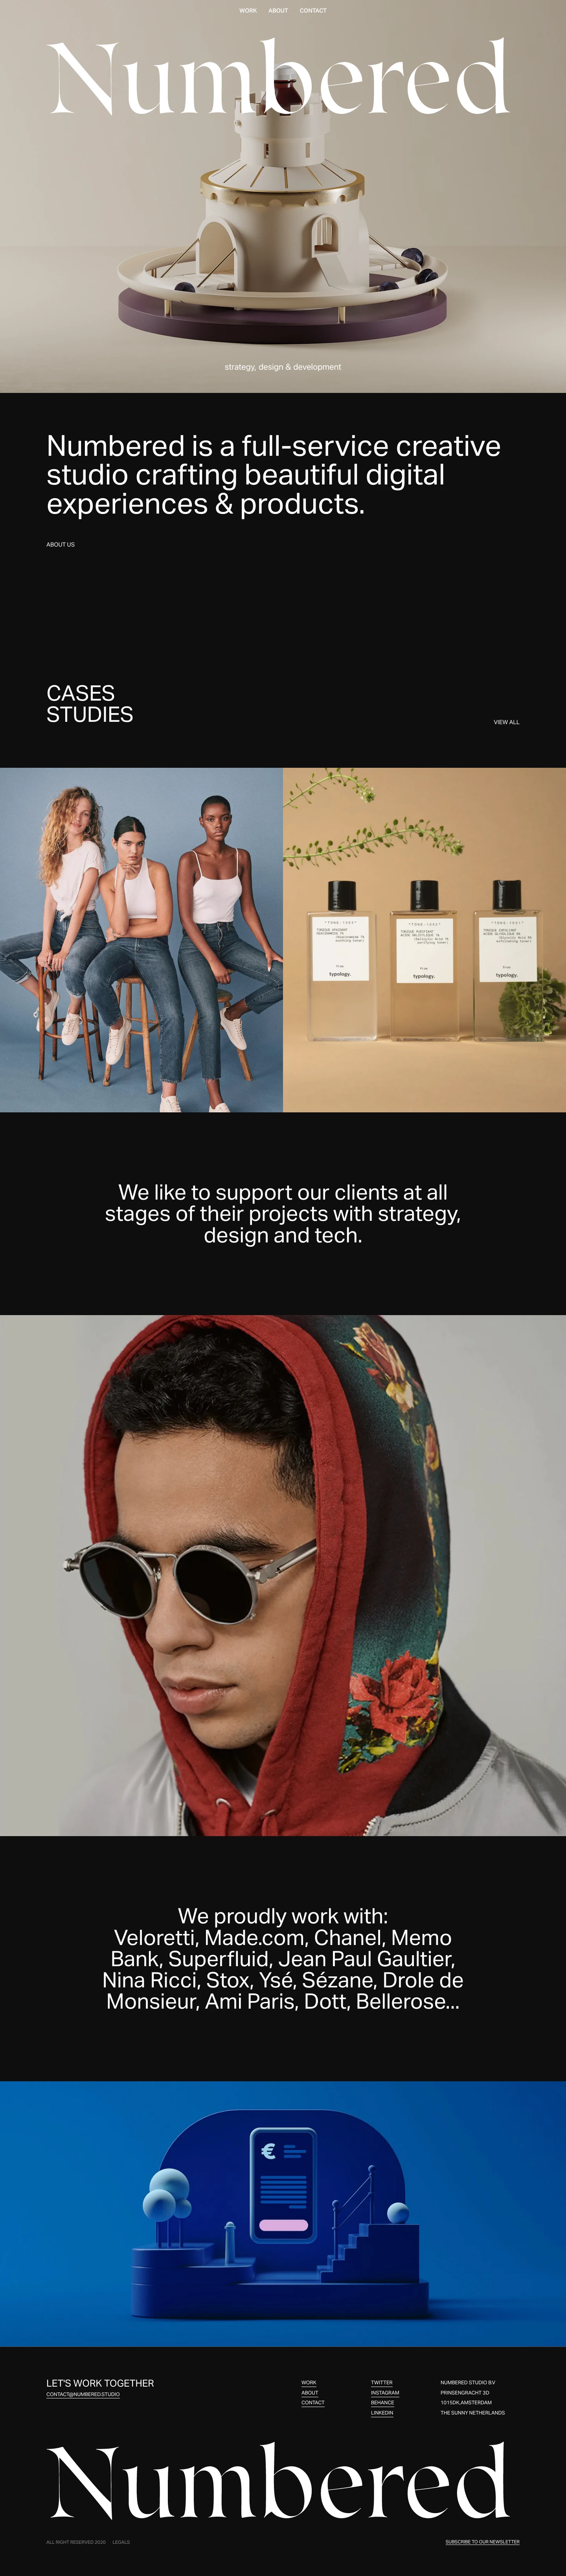 Numbered Studio Landing Page Example: Numbered is a full-service creative studio working with fashion, tech & lifestyle brands. We like to support our clients at all stages of their projects with strategy, design and tech.